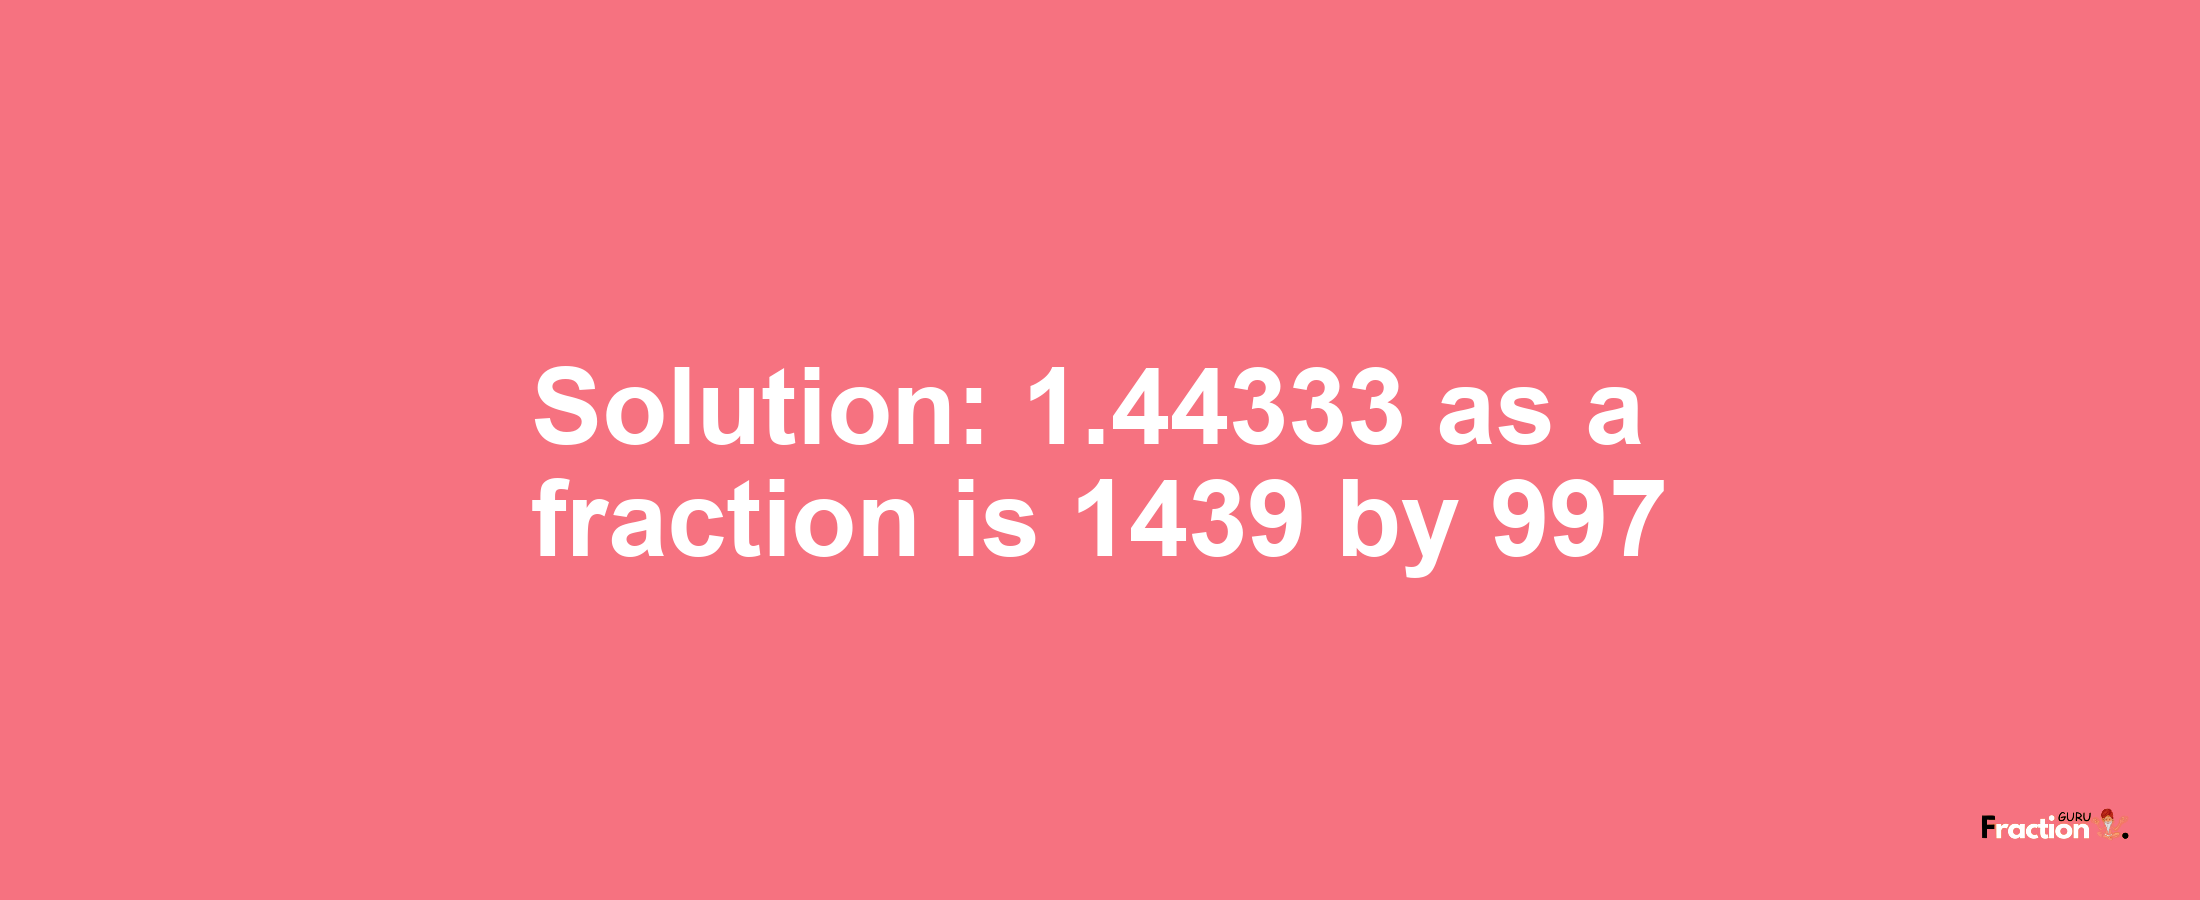 Solution:1.44333 as a fraction is 1439/997